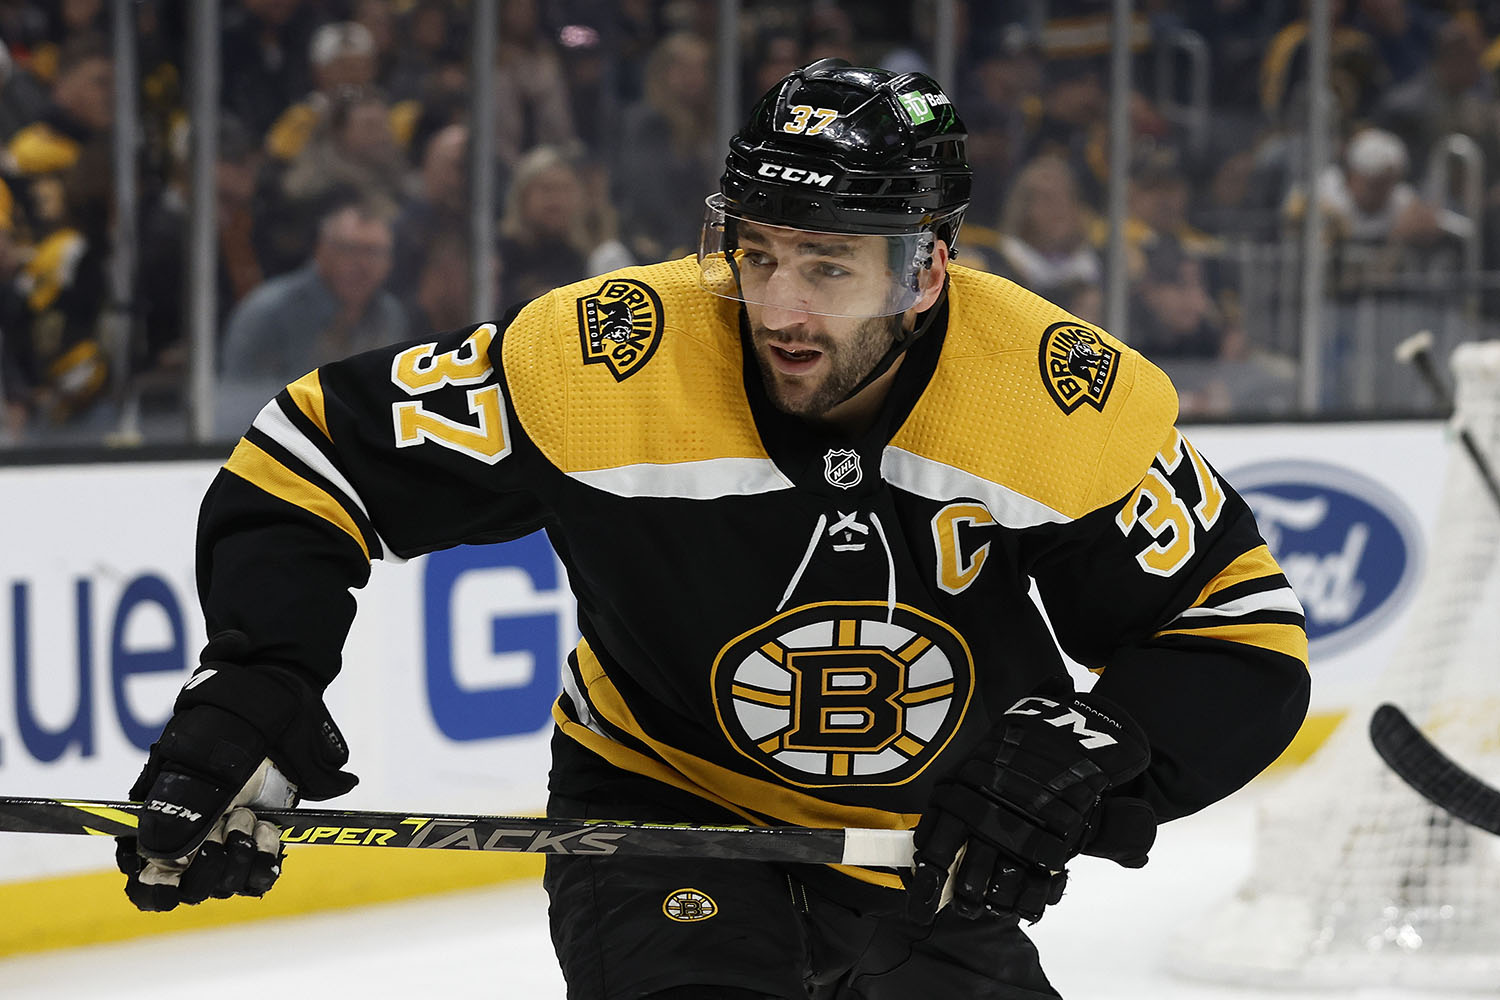 With Bergeron back, Bruins will make another run at Cup